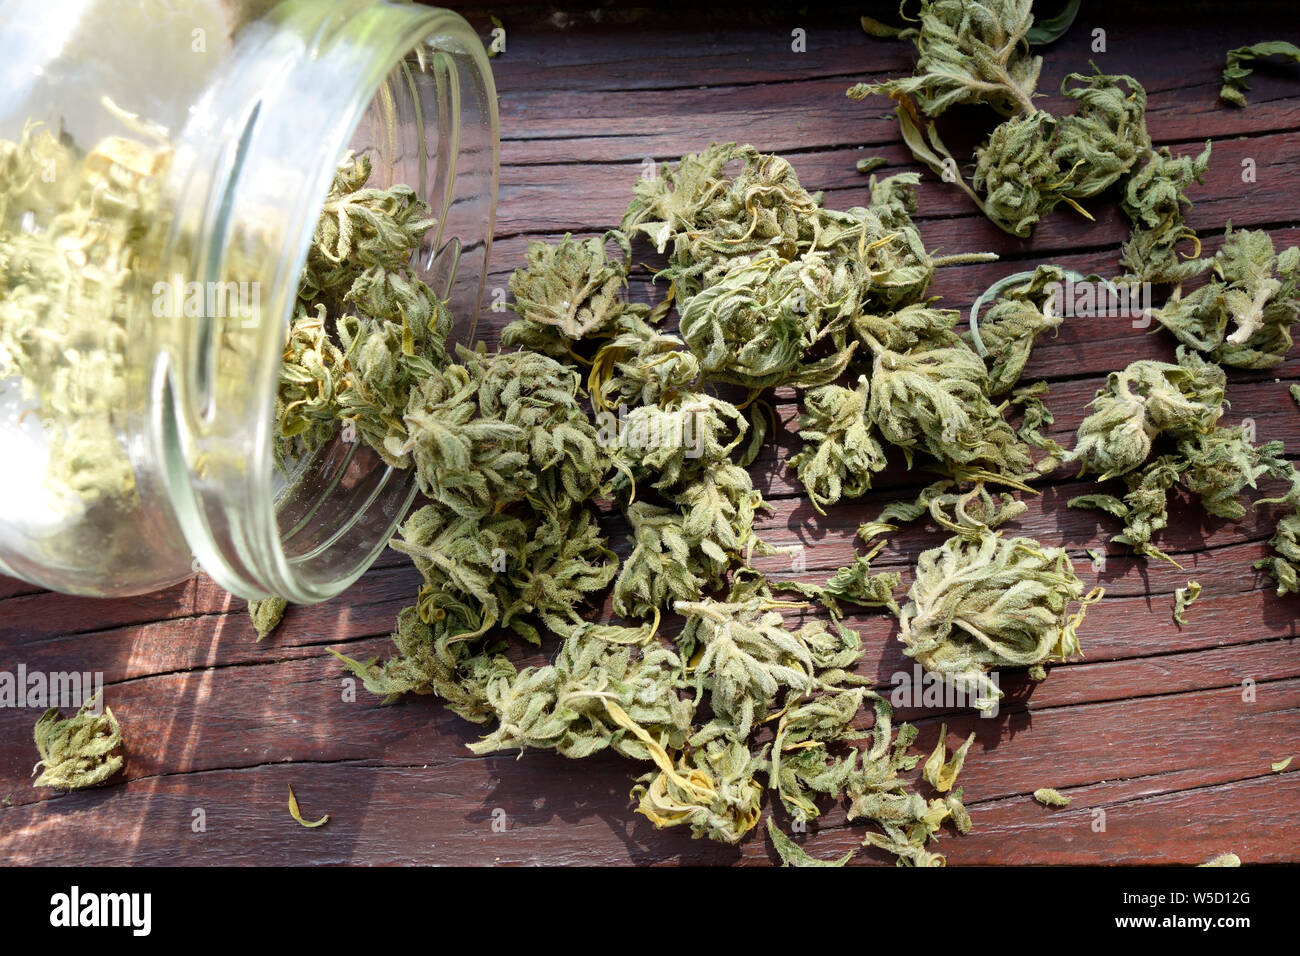 Cured and dried CBD cannabis buds spills out of a jar are ready for consumption. Stock Photo